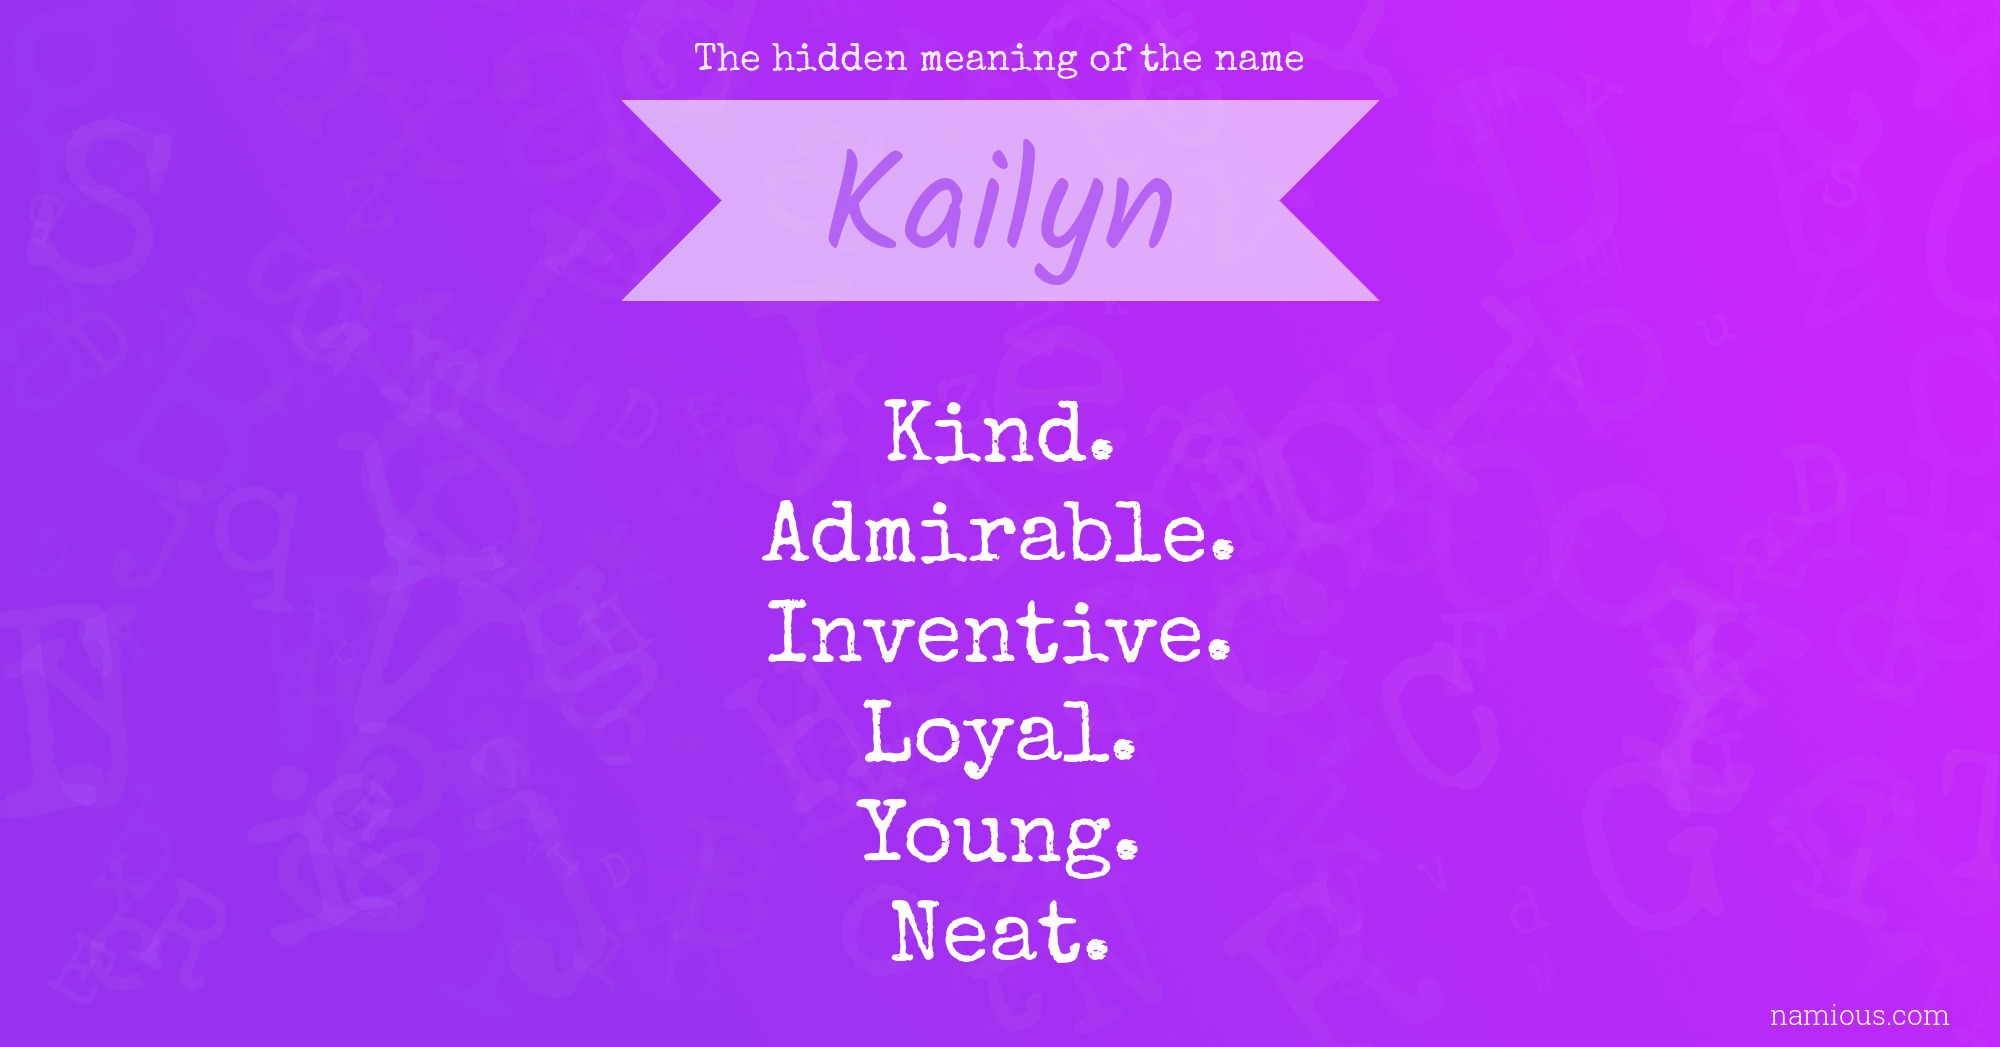 The hidden meaning of the name Kailyn